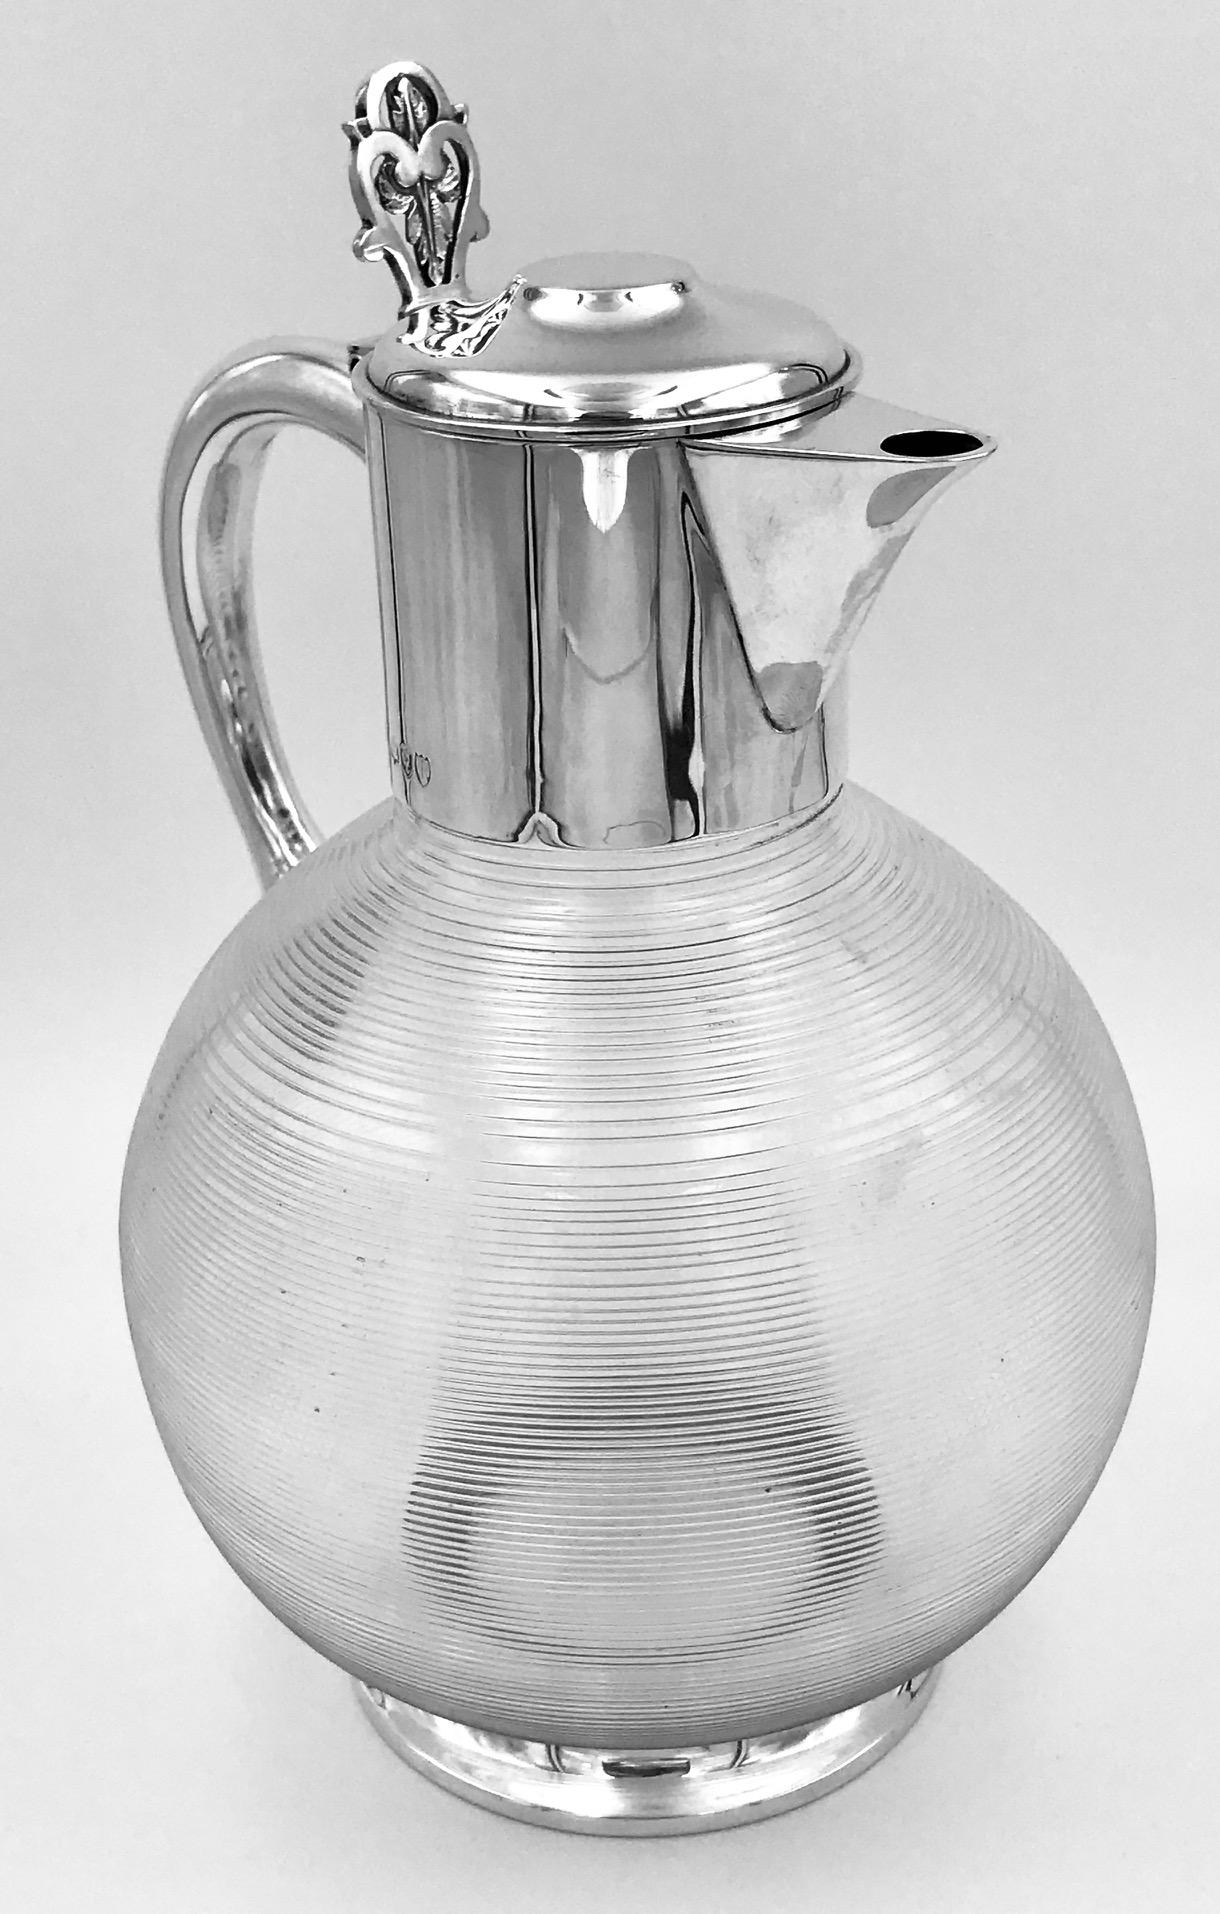 An unusual silver and glass English silver claret jug. The jug has a plain silver mount and a very unusual ribbed glass body.